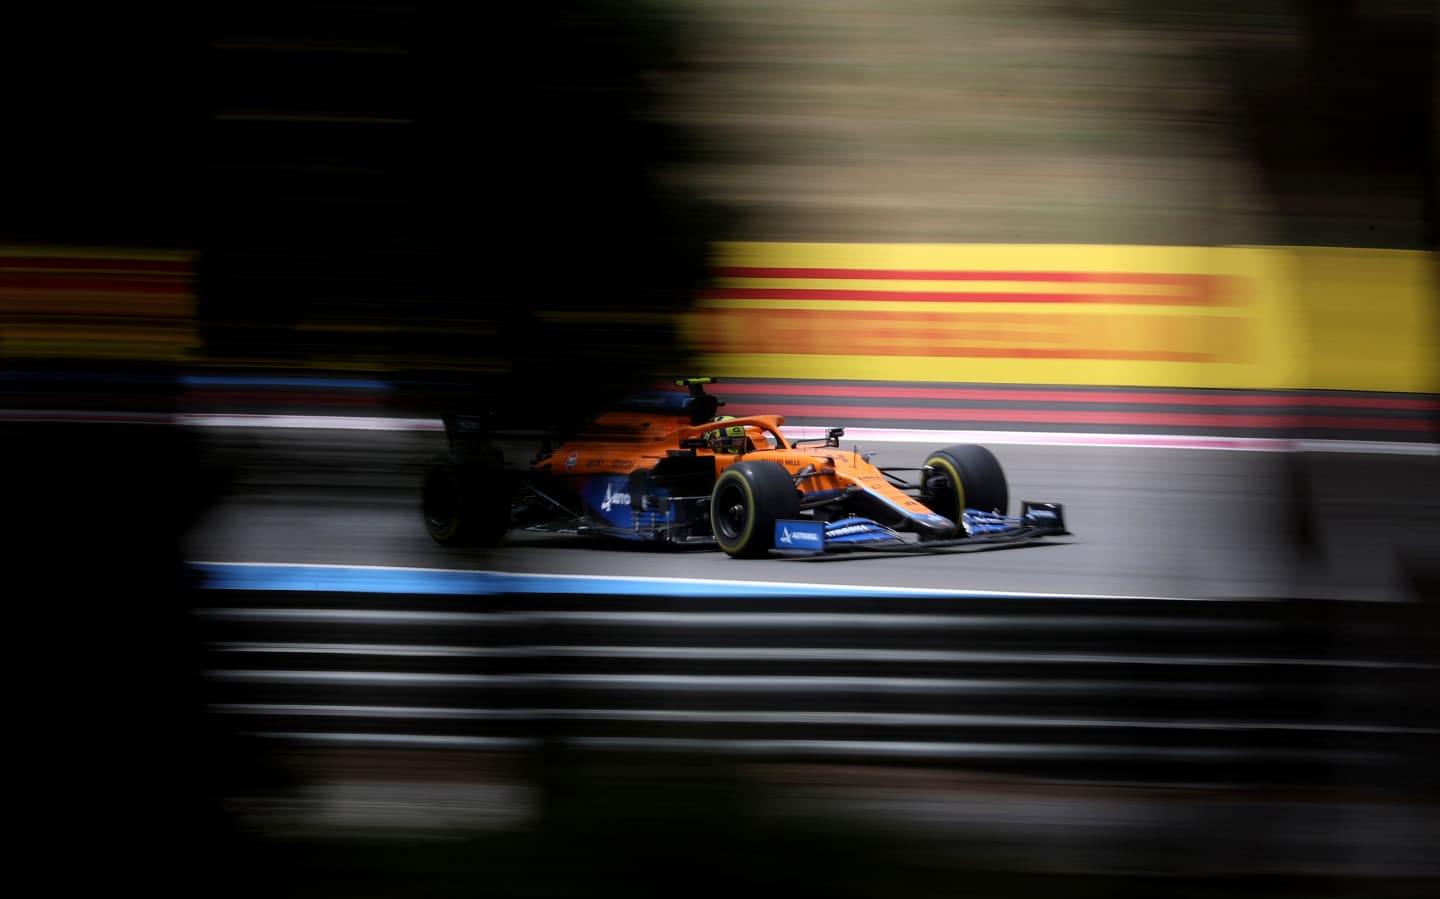 LE CASTELLET, FRANCE - JUNE 20: Lando Norris of Great Britain driving the (4) McLaren F1 Team MCL35M Mercedes on track during the F1 Grand Prix of France at Circuit Paul Ricard on June 20, 2021 in Le Castellet, France. (Photo by Clive Rose/Getty Images)